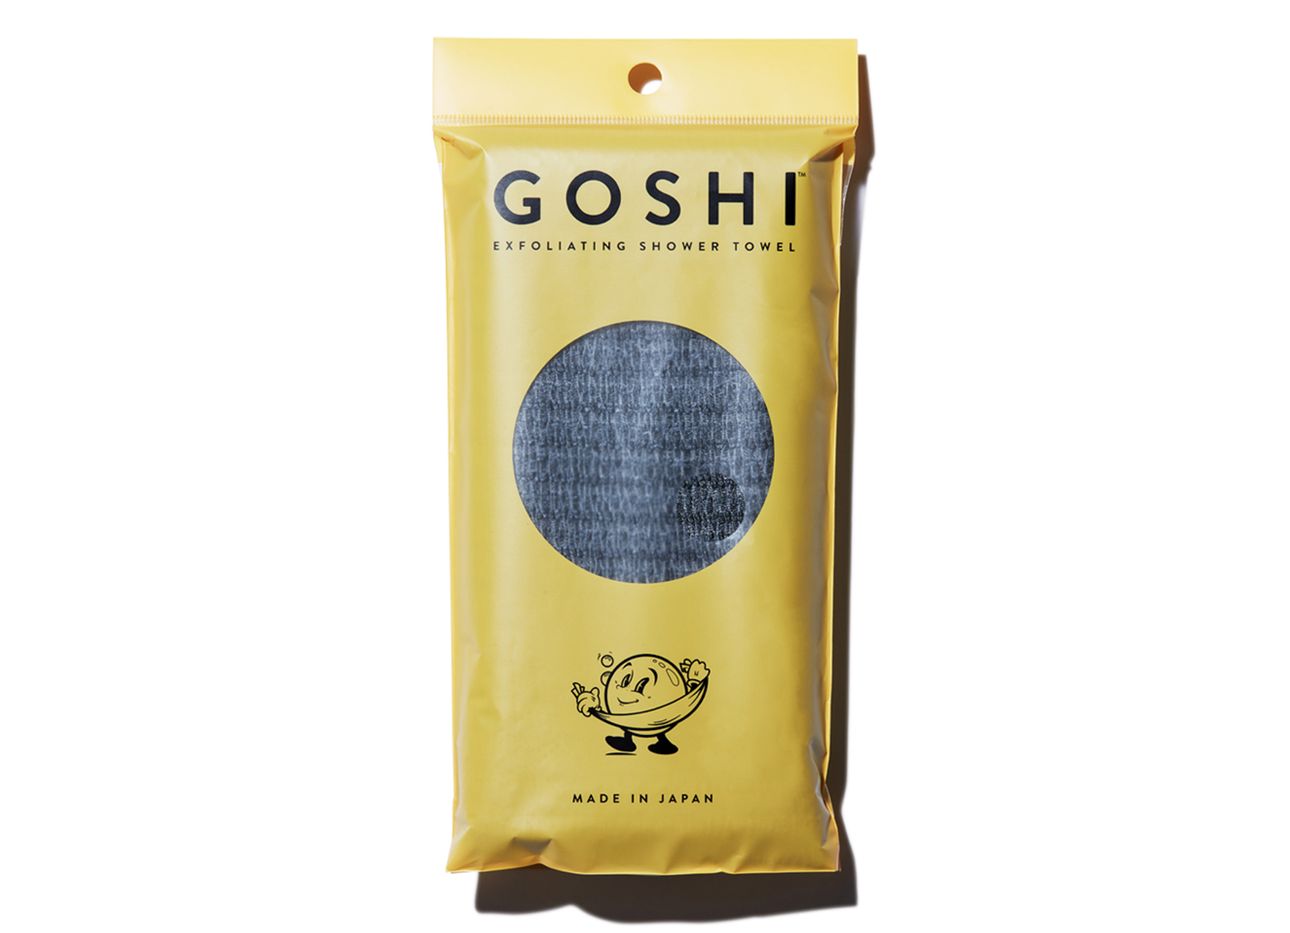 A Goshi towel in a yellow package.